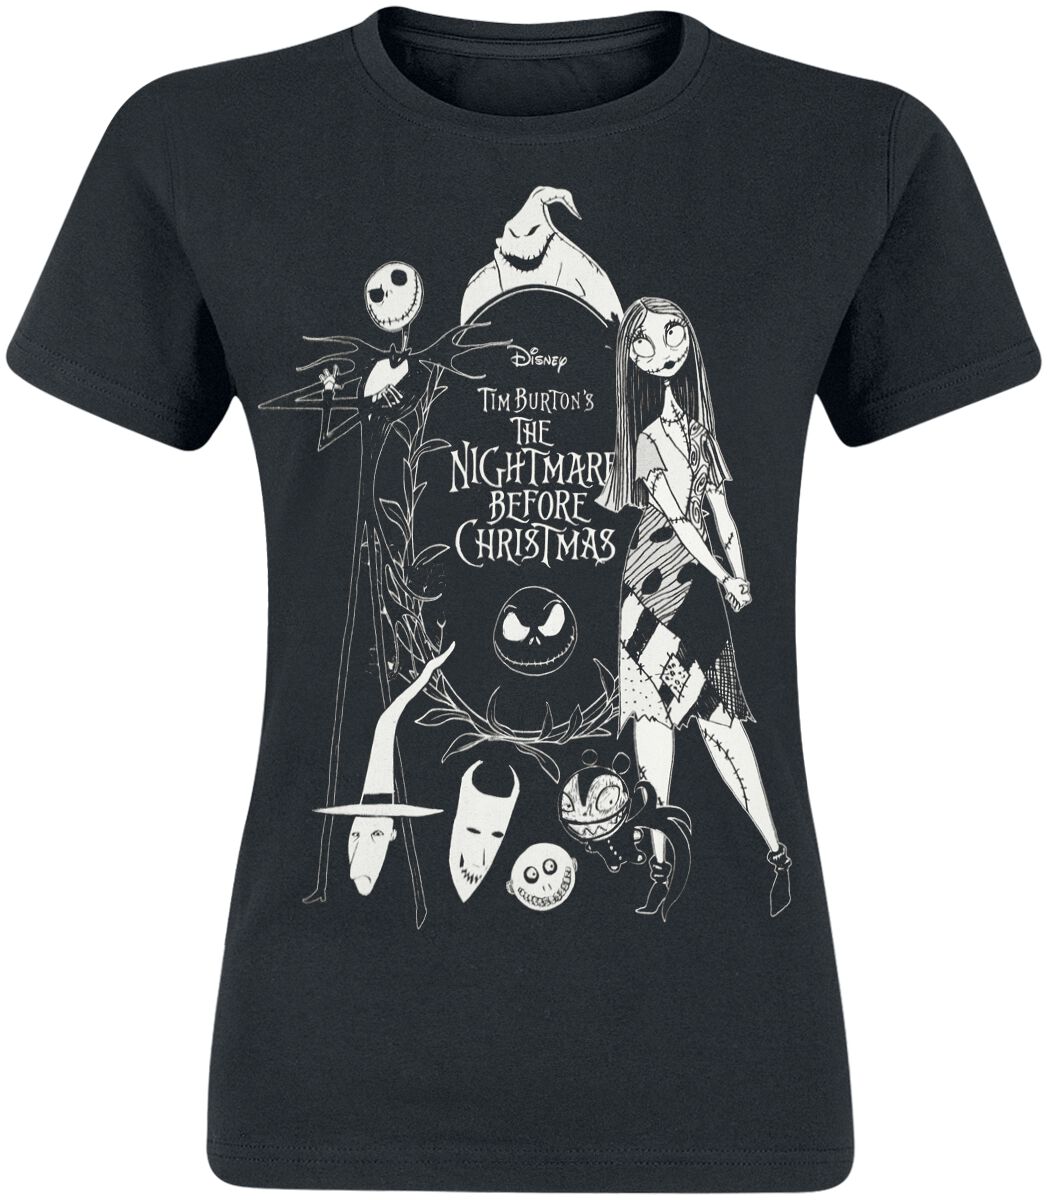 The Nightmare Before Christmas Nightmare Band T-Shirt schwarz in S